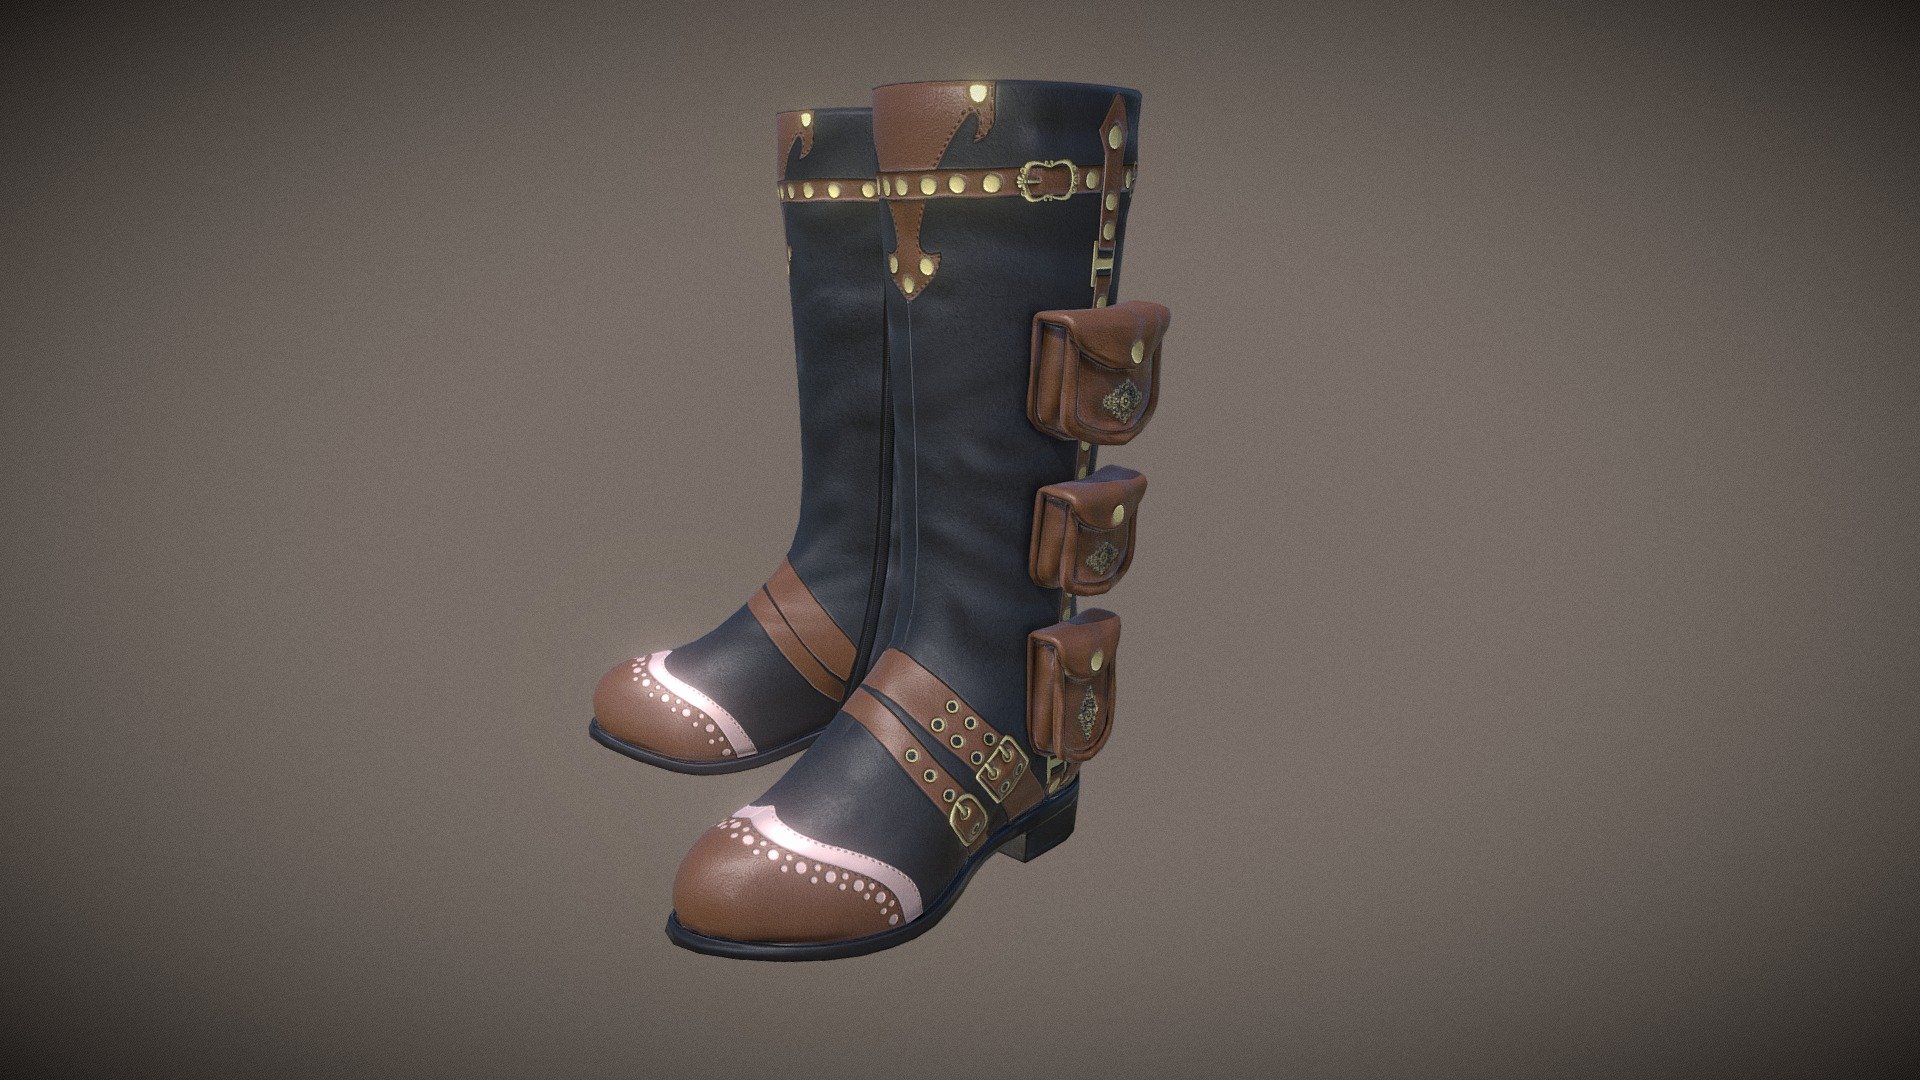 Nice Steampunk boots
Made with blender and substance painter - Steampunk Boots - Buy Royalty Free 3D model by capus.design 3d model